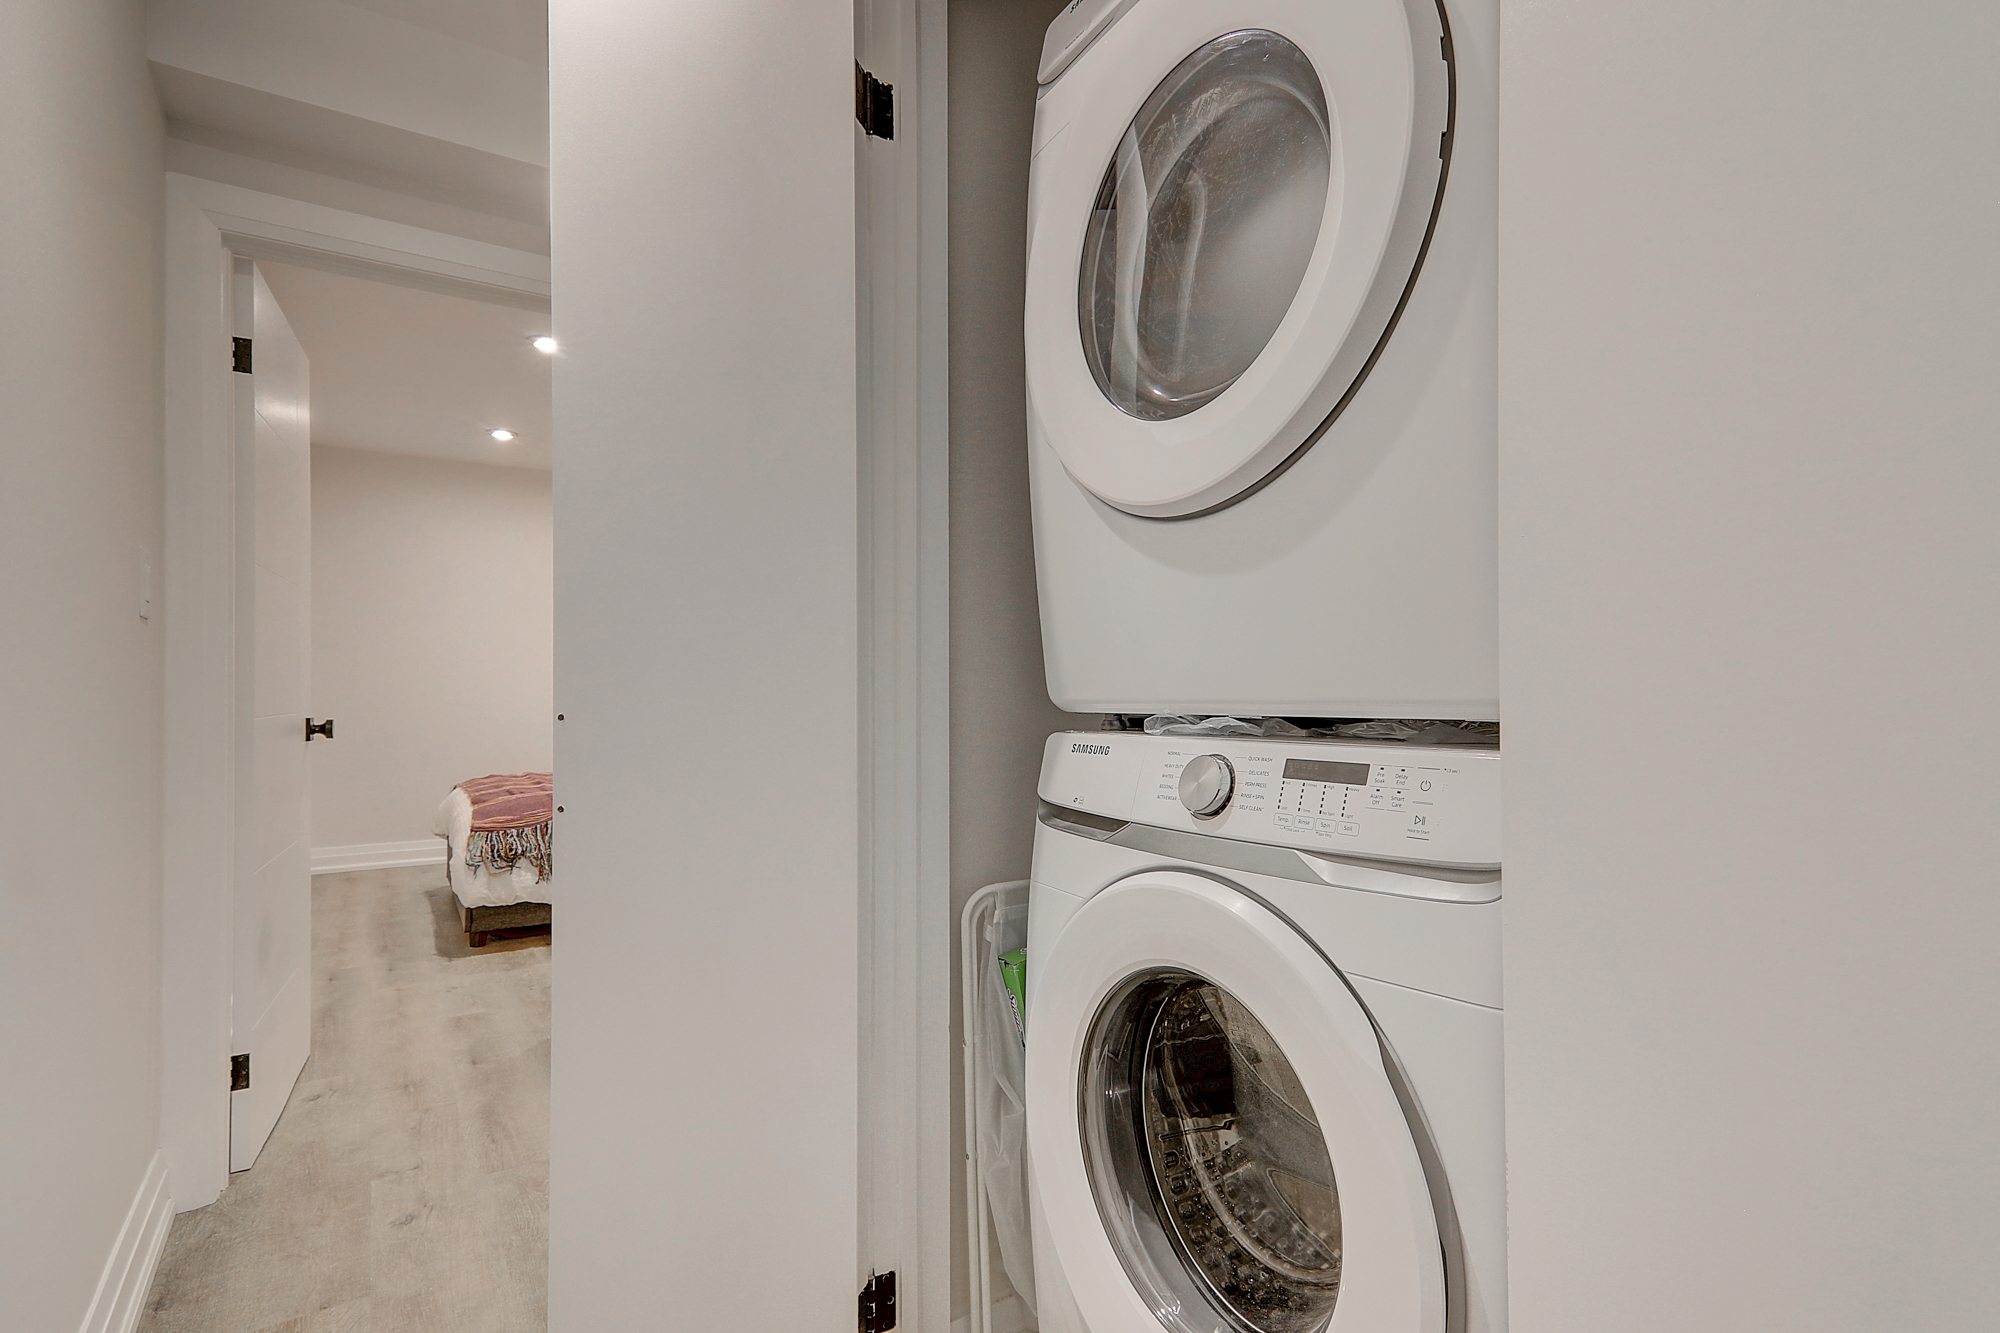 A washing machine and dryer in a room